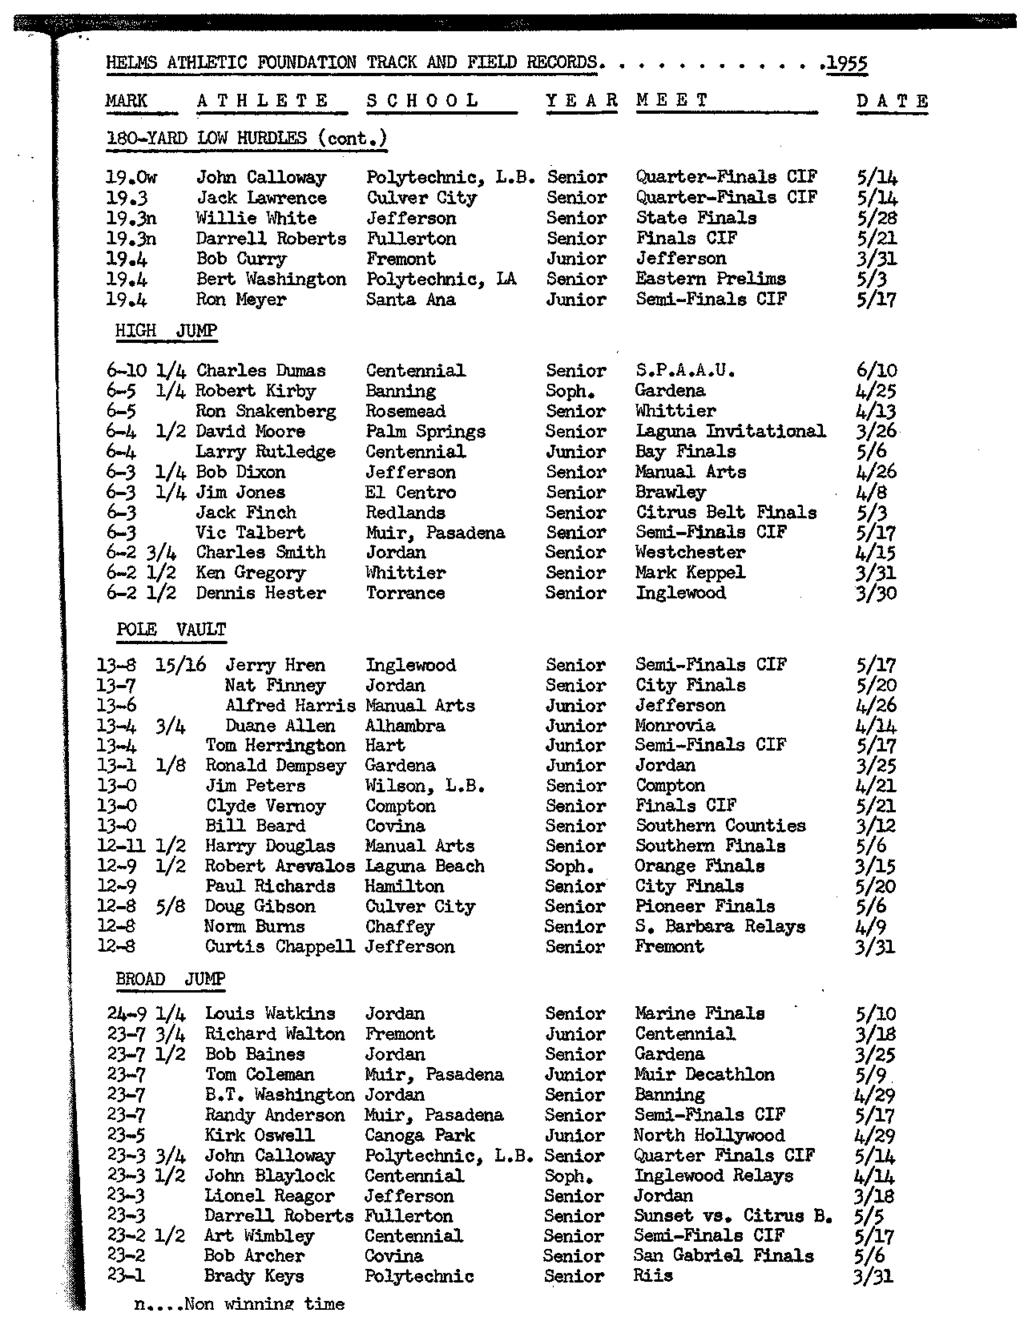 HELMS ATHLETIC FOUNDATION TRACK AND FIELD RECORDS.1955 MARK ATHLETE SCHOOL YEAR MEET DATE 180-YARD LOW HURDLES (cont.) 19.0w John Calloway Polytechnic, L.B. Senior Quarter-Finals CIF 5/14 19.